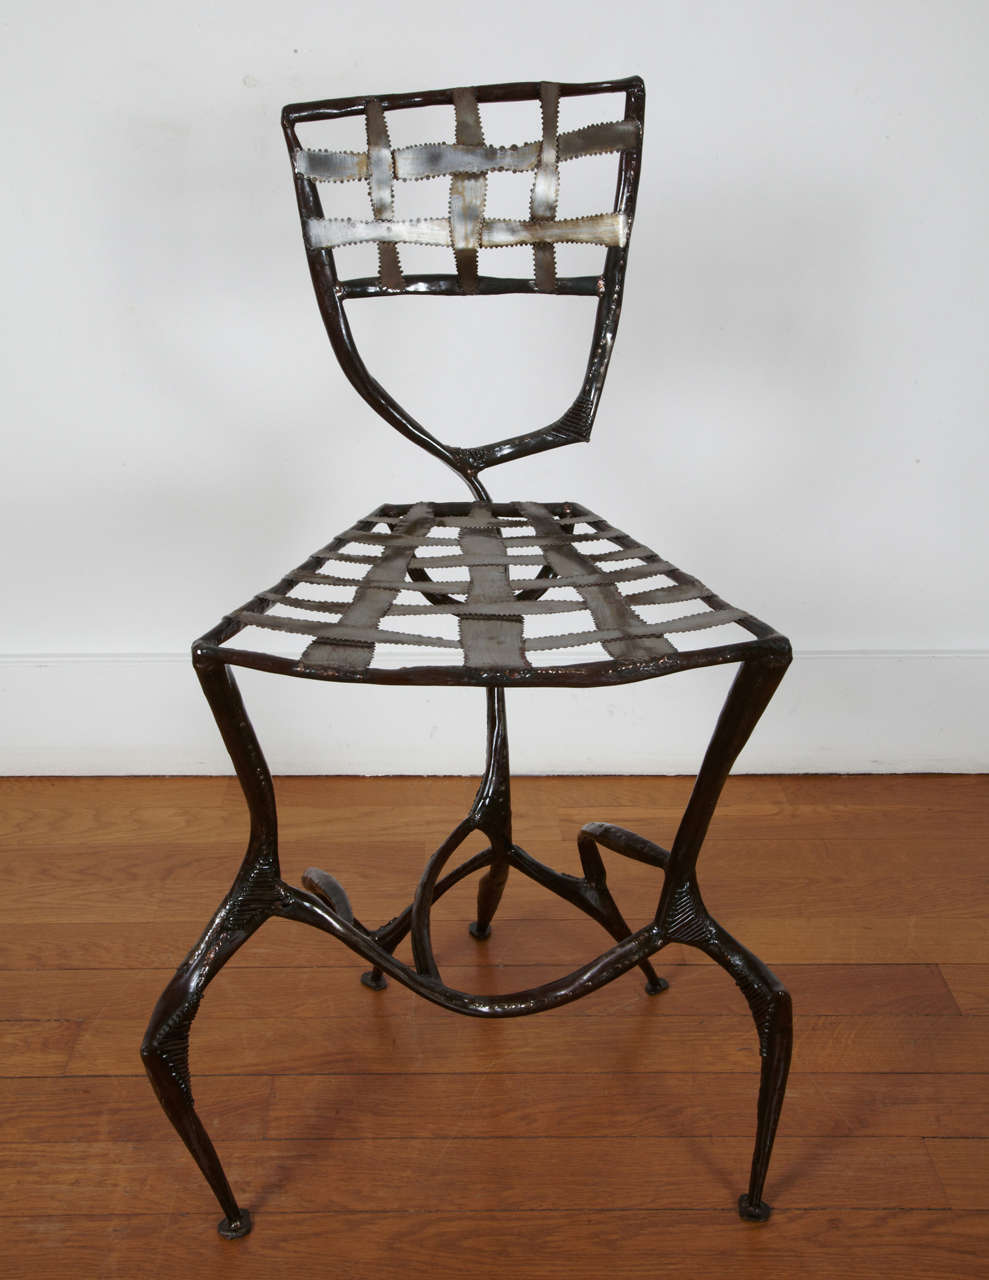 Two Steel Copperware Chairs, 2008 / 2013 by Manuel Simon. 1